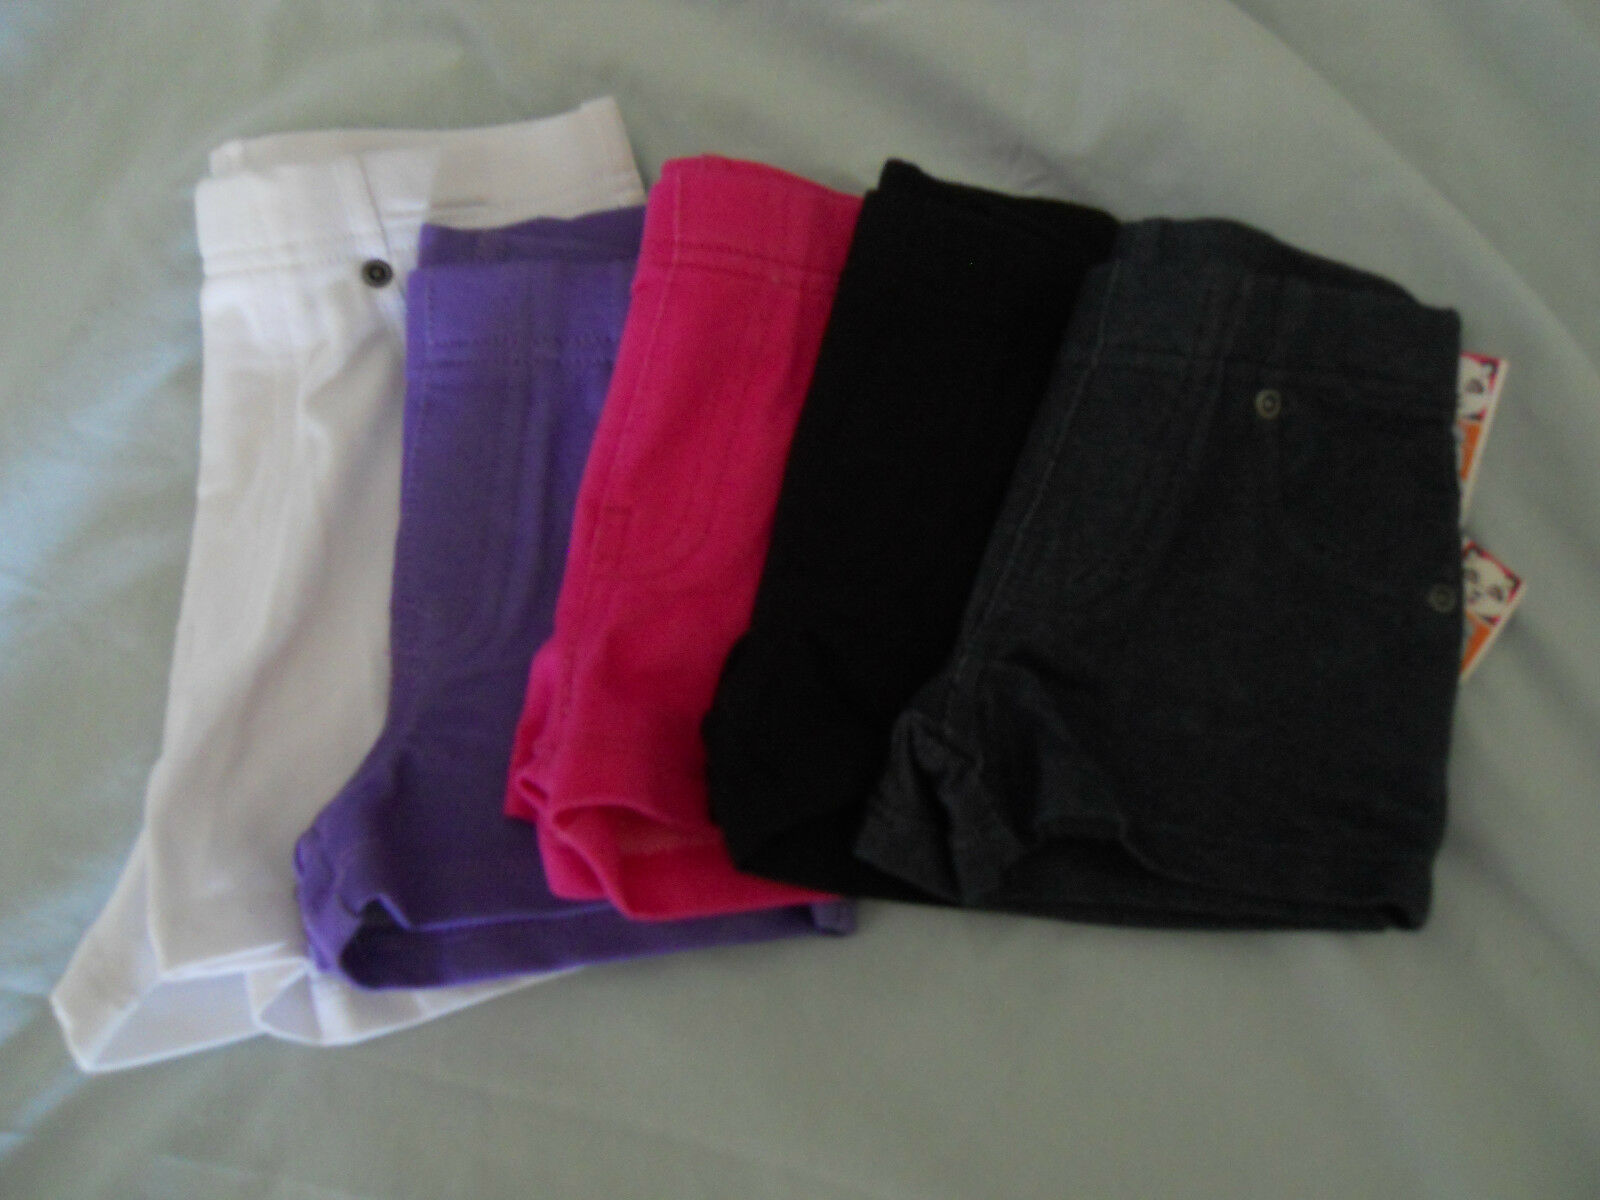 Primary image for NEW Girls Knit Shorts Sz 12m 18M 24M 2T 3T 4T 5T Pink Black Blue Purple White 